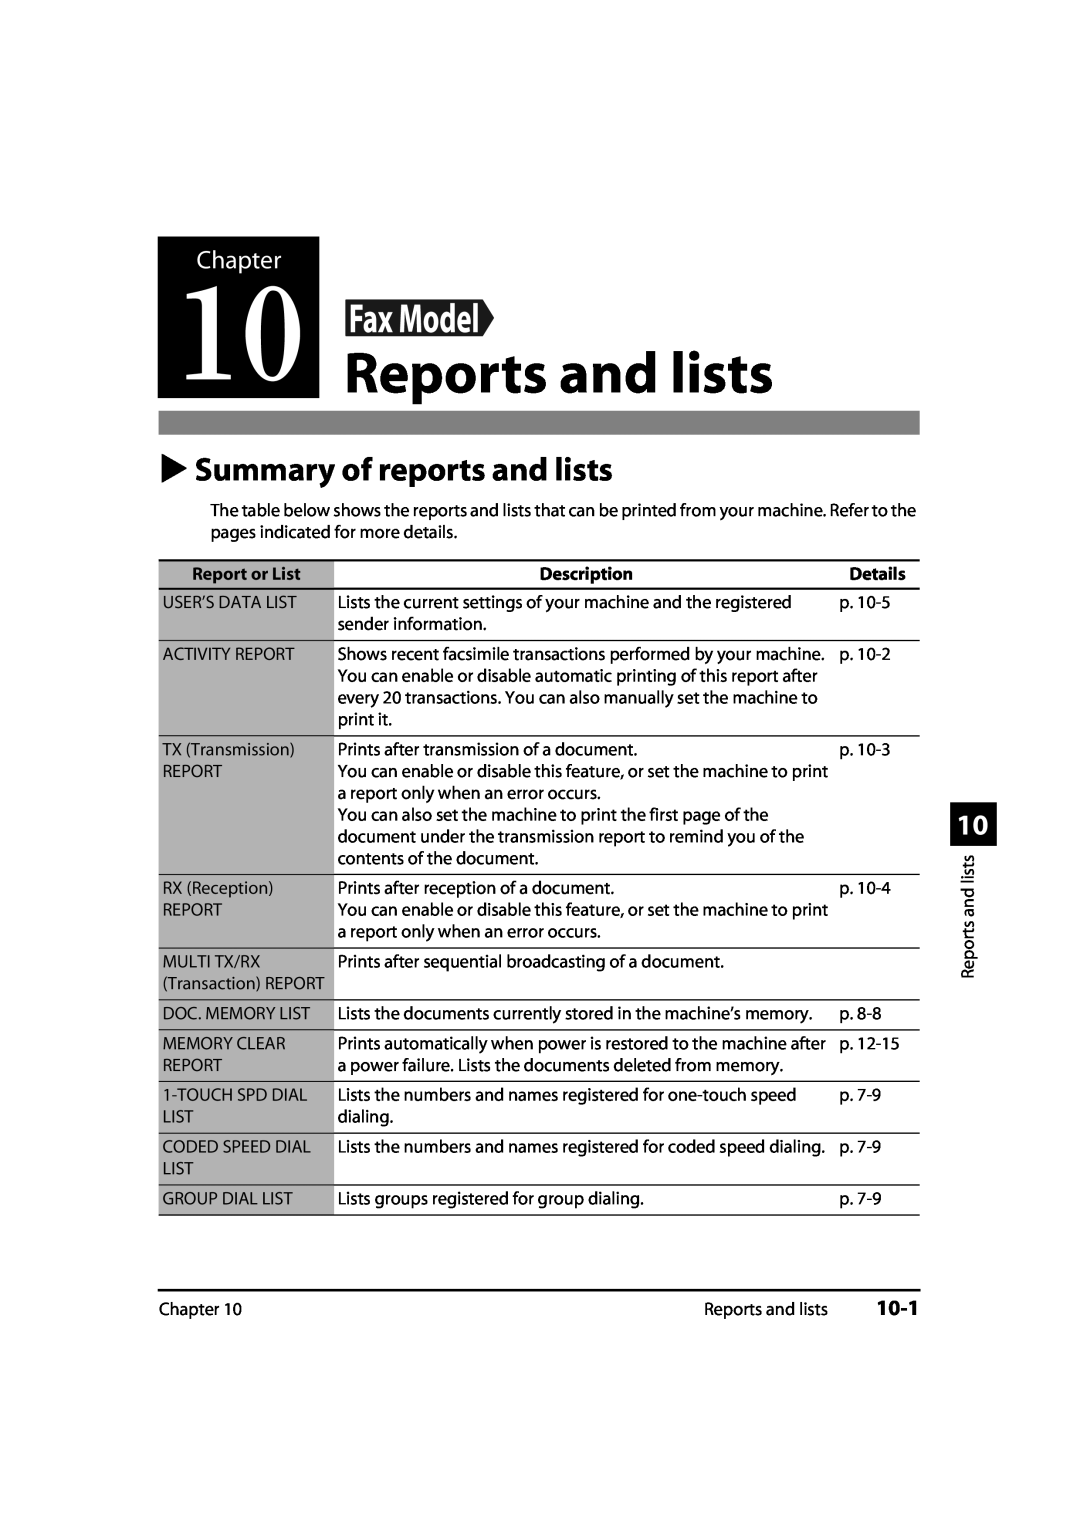 Canon MultiPASS MP730 Reports and lists, Summary of reports and lists, 10-1, Chapter, Report or List, Description, Details 